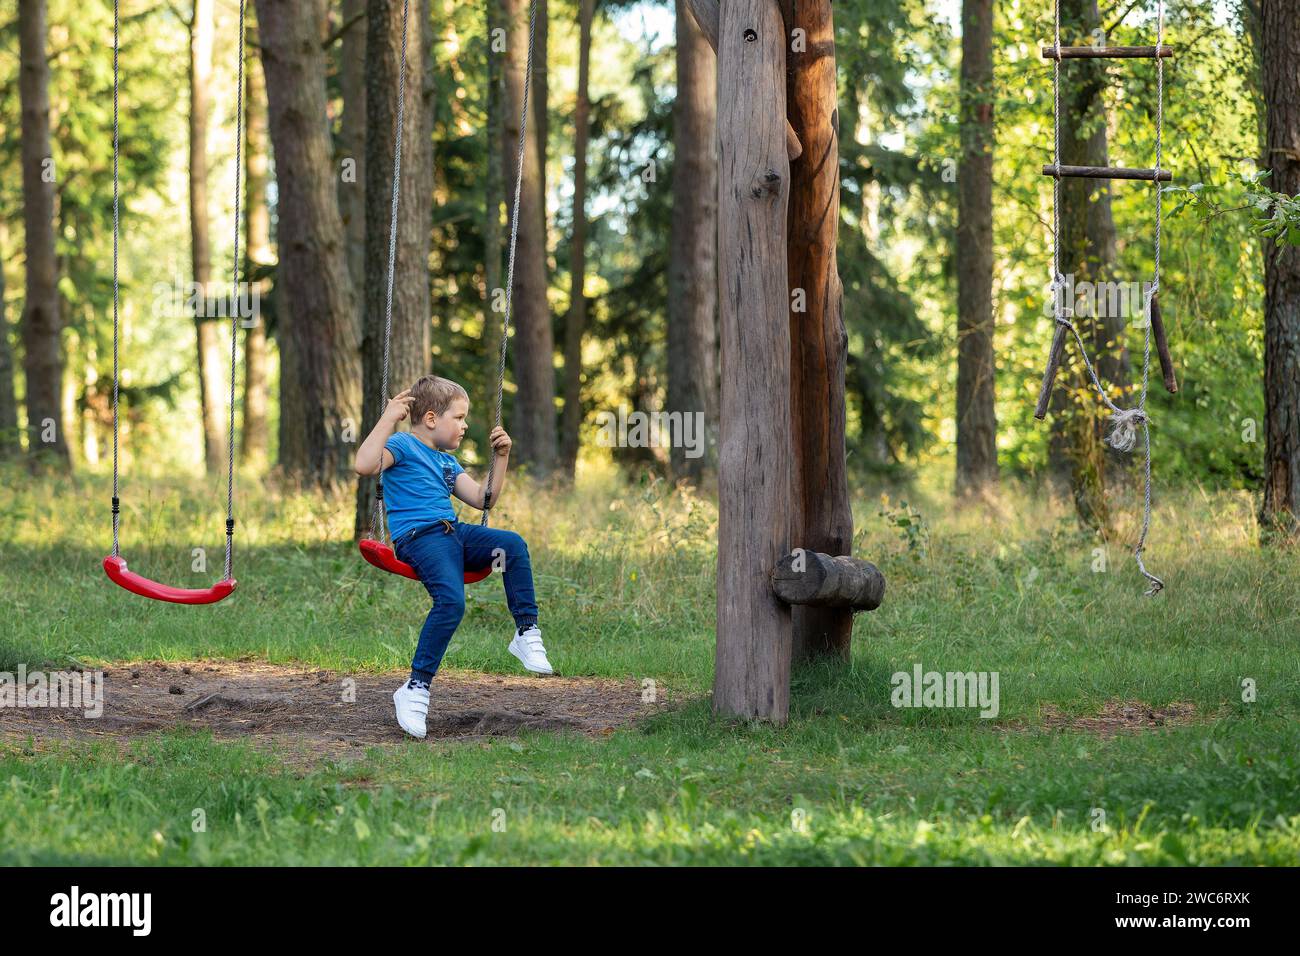 A cute little boy is photographed in profile sitting on a high rope swing with red seats in a pine forest. Stock Photo